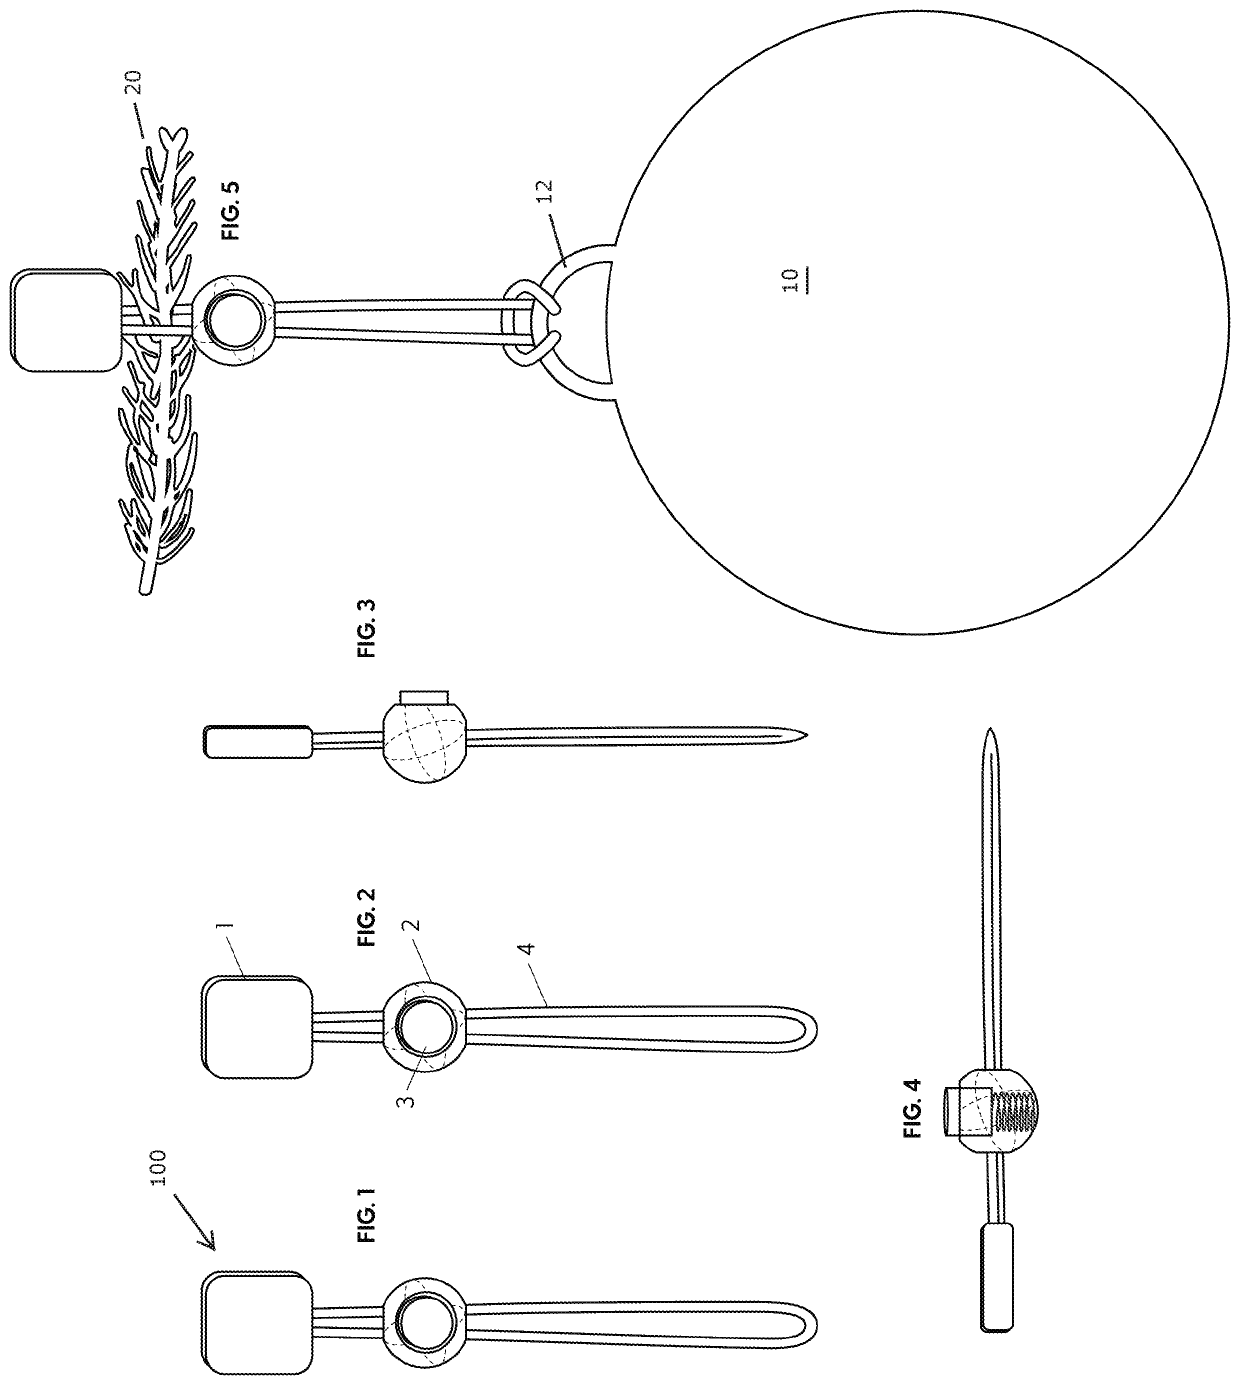 Device for securing ornaments to a tree